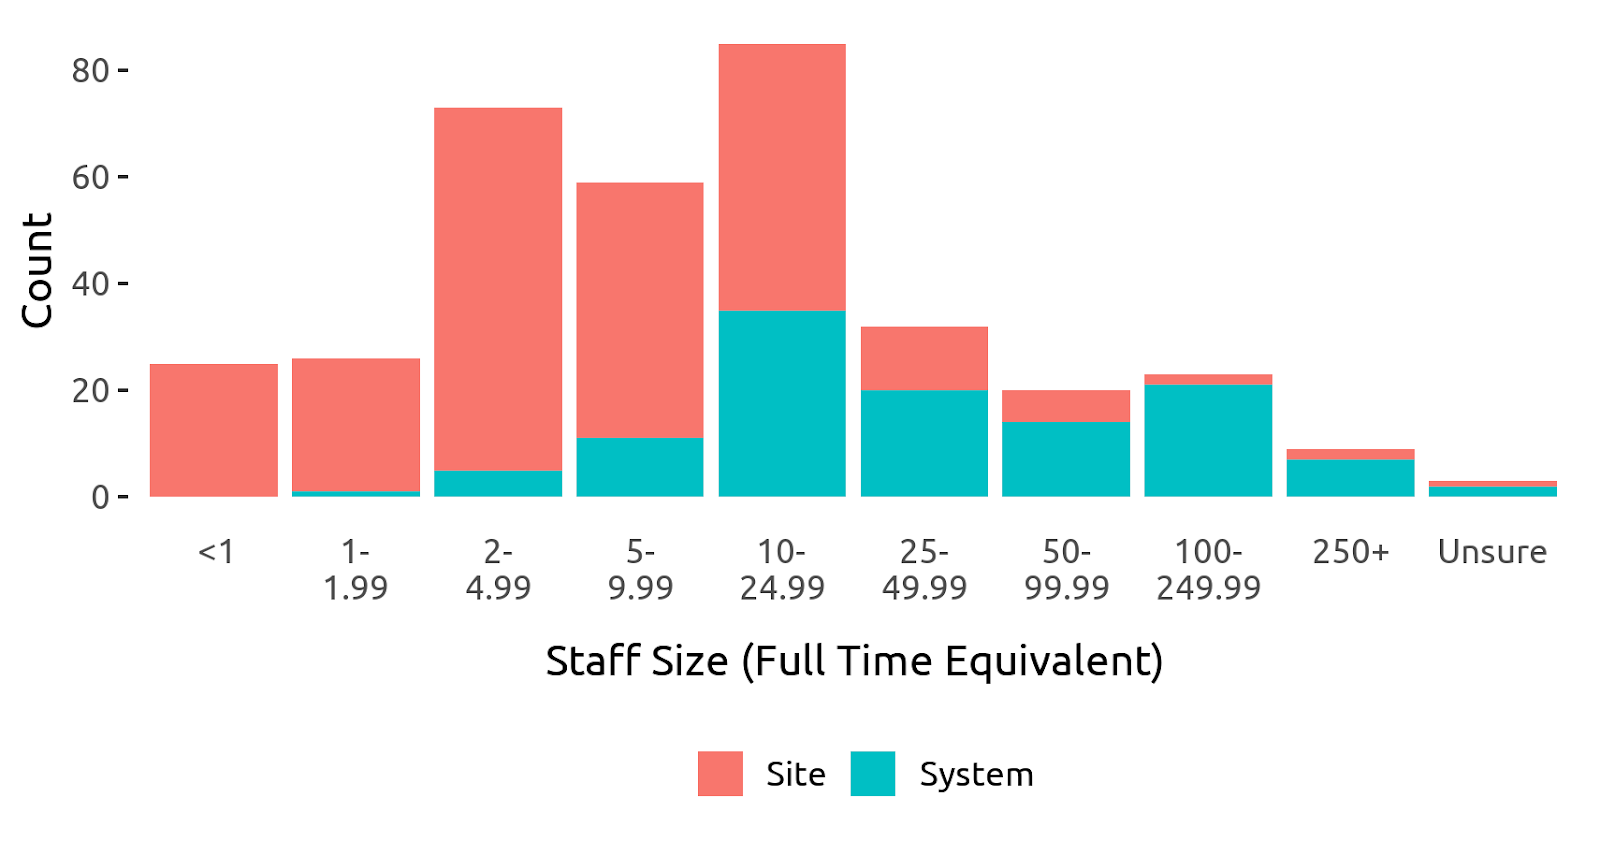 A bar graph showing Staff Size of survey respondents